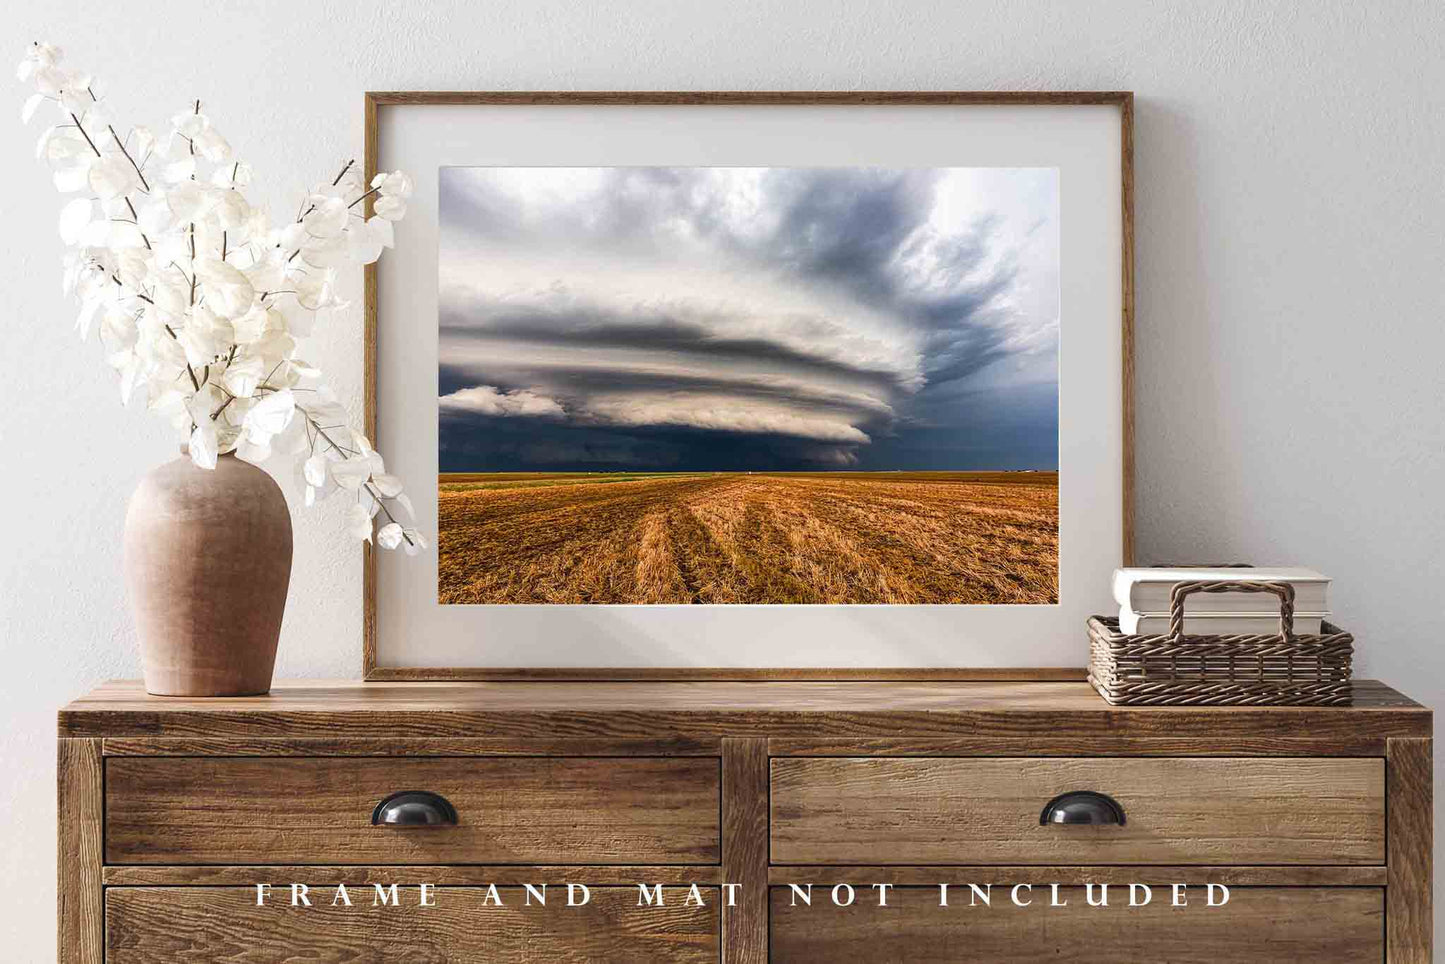 Storm Photography Print - Picture of Layered Supercell Thunderstorm Over Open Field in Kansas - Weather Home Decor Wall Art Photo Artwork